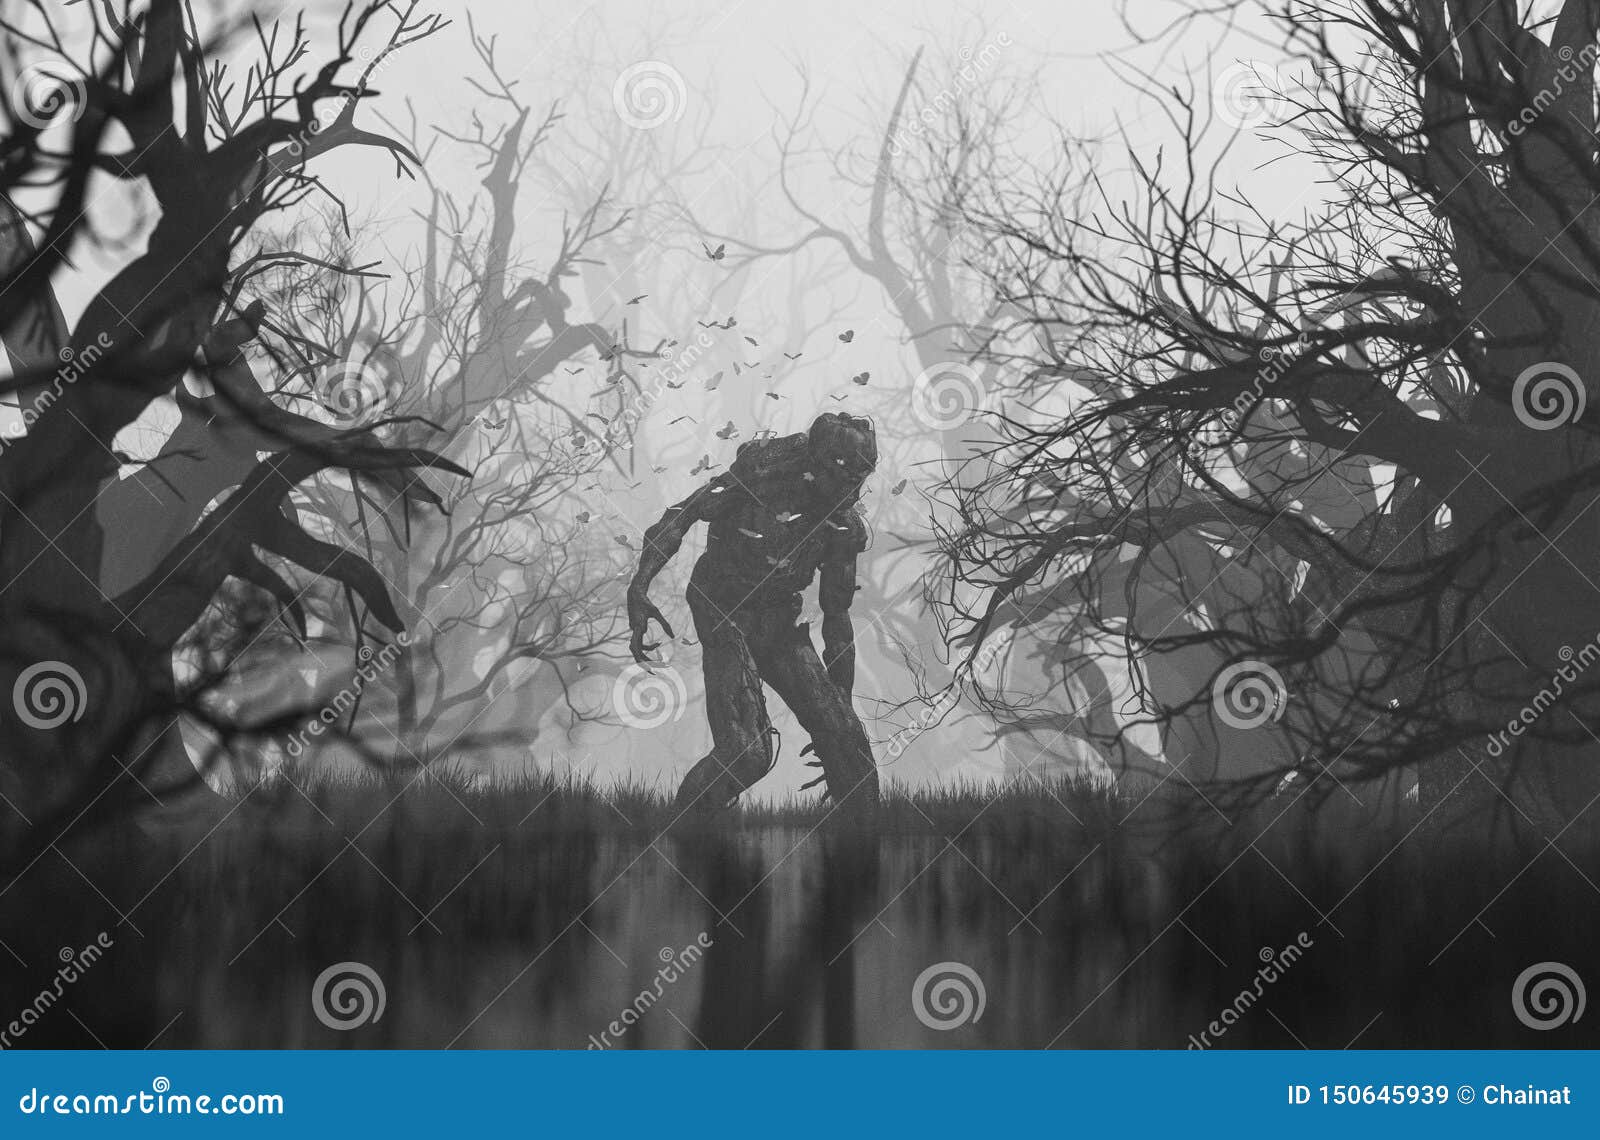 monster in creepy forest